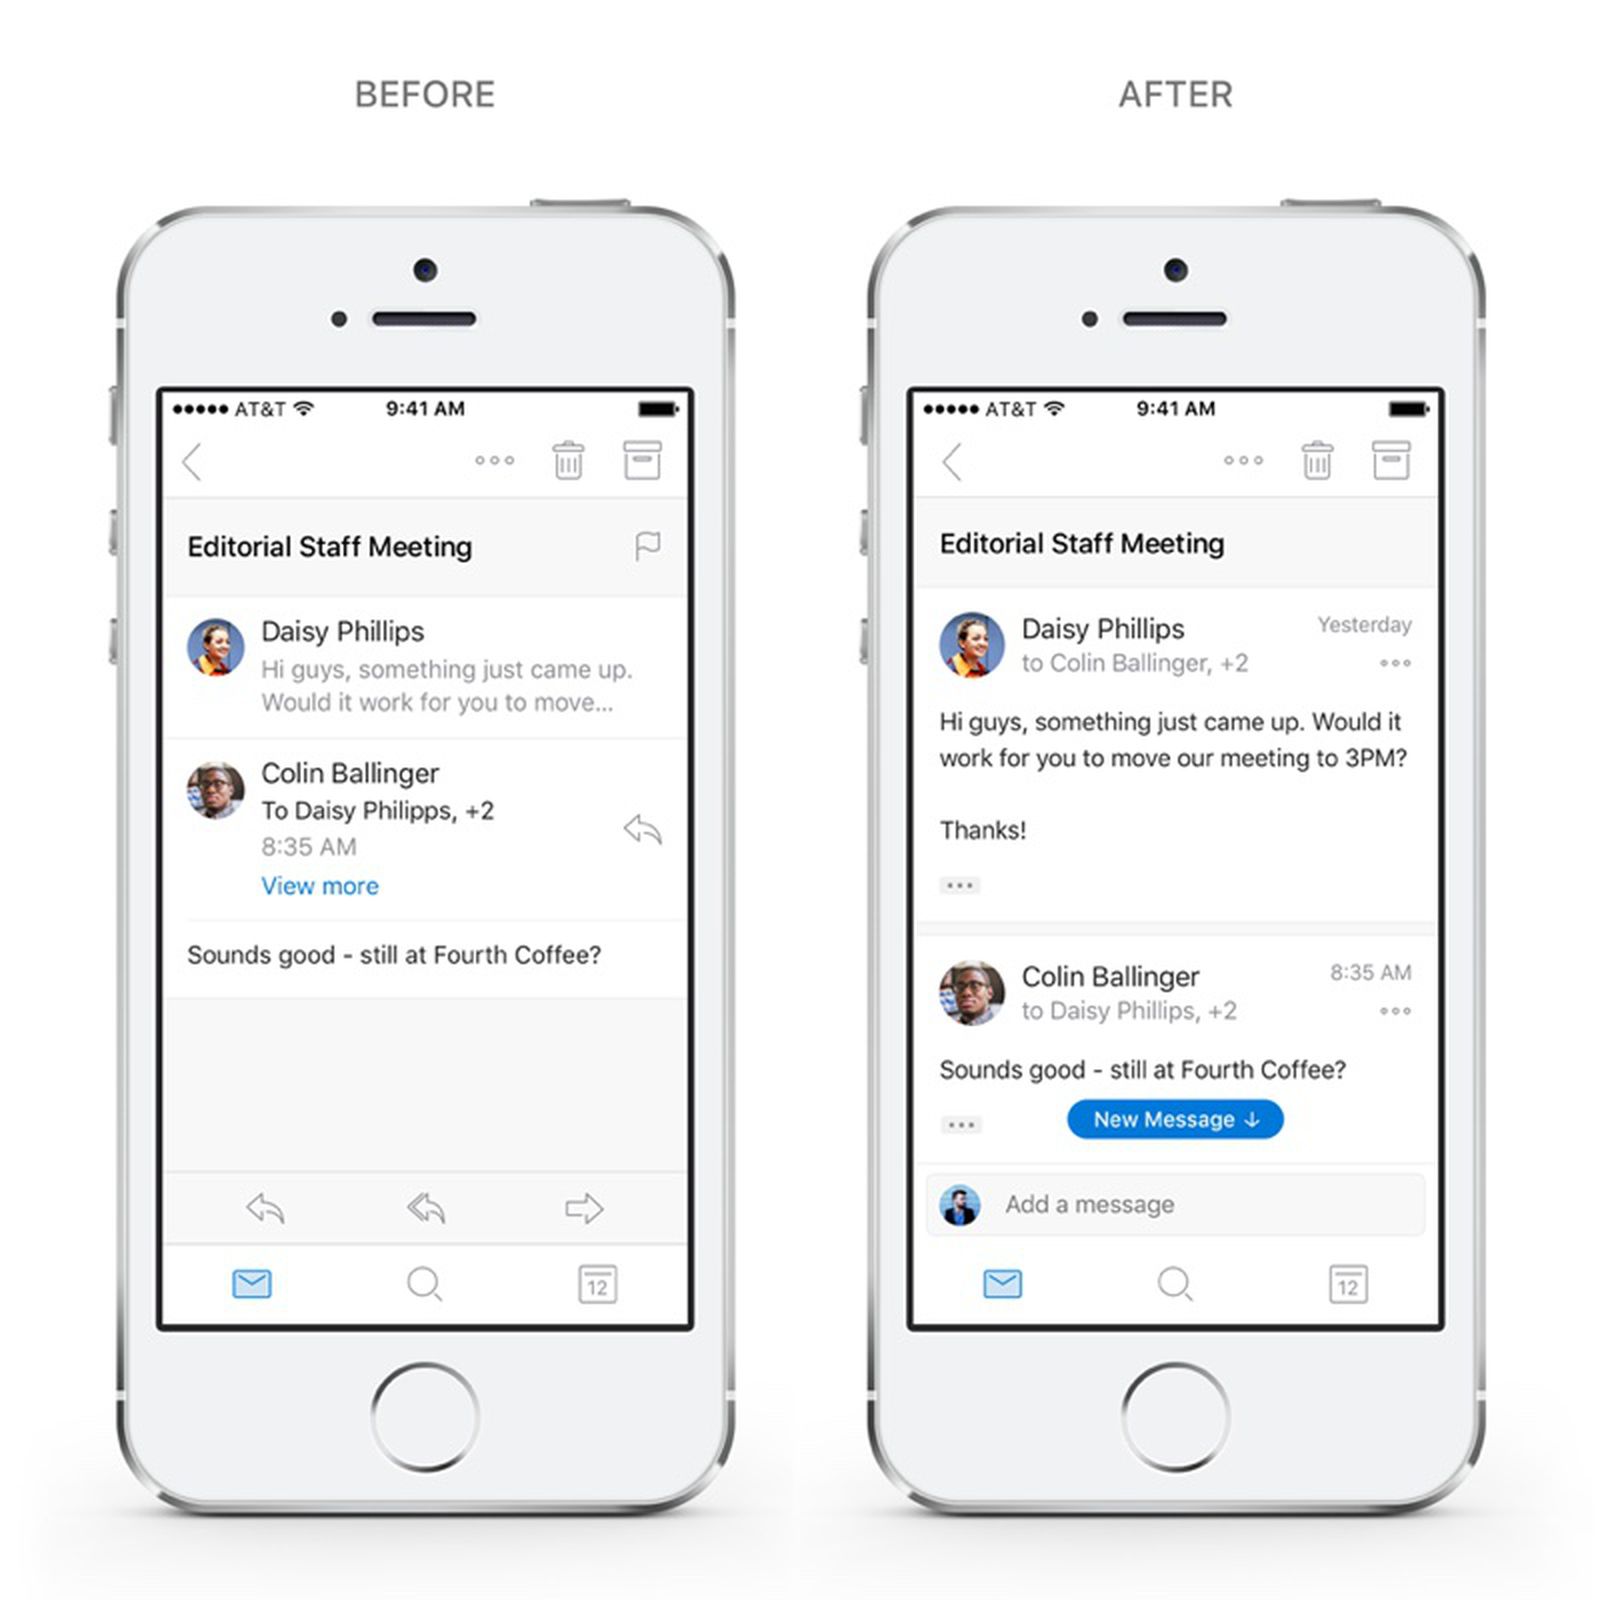 Outlook for iOS 8 vs Apple Mail for iOS